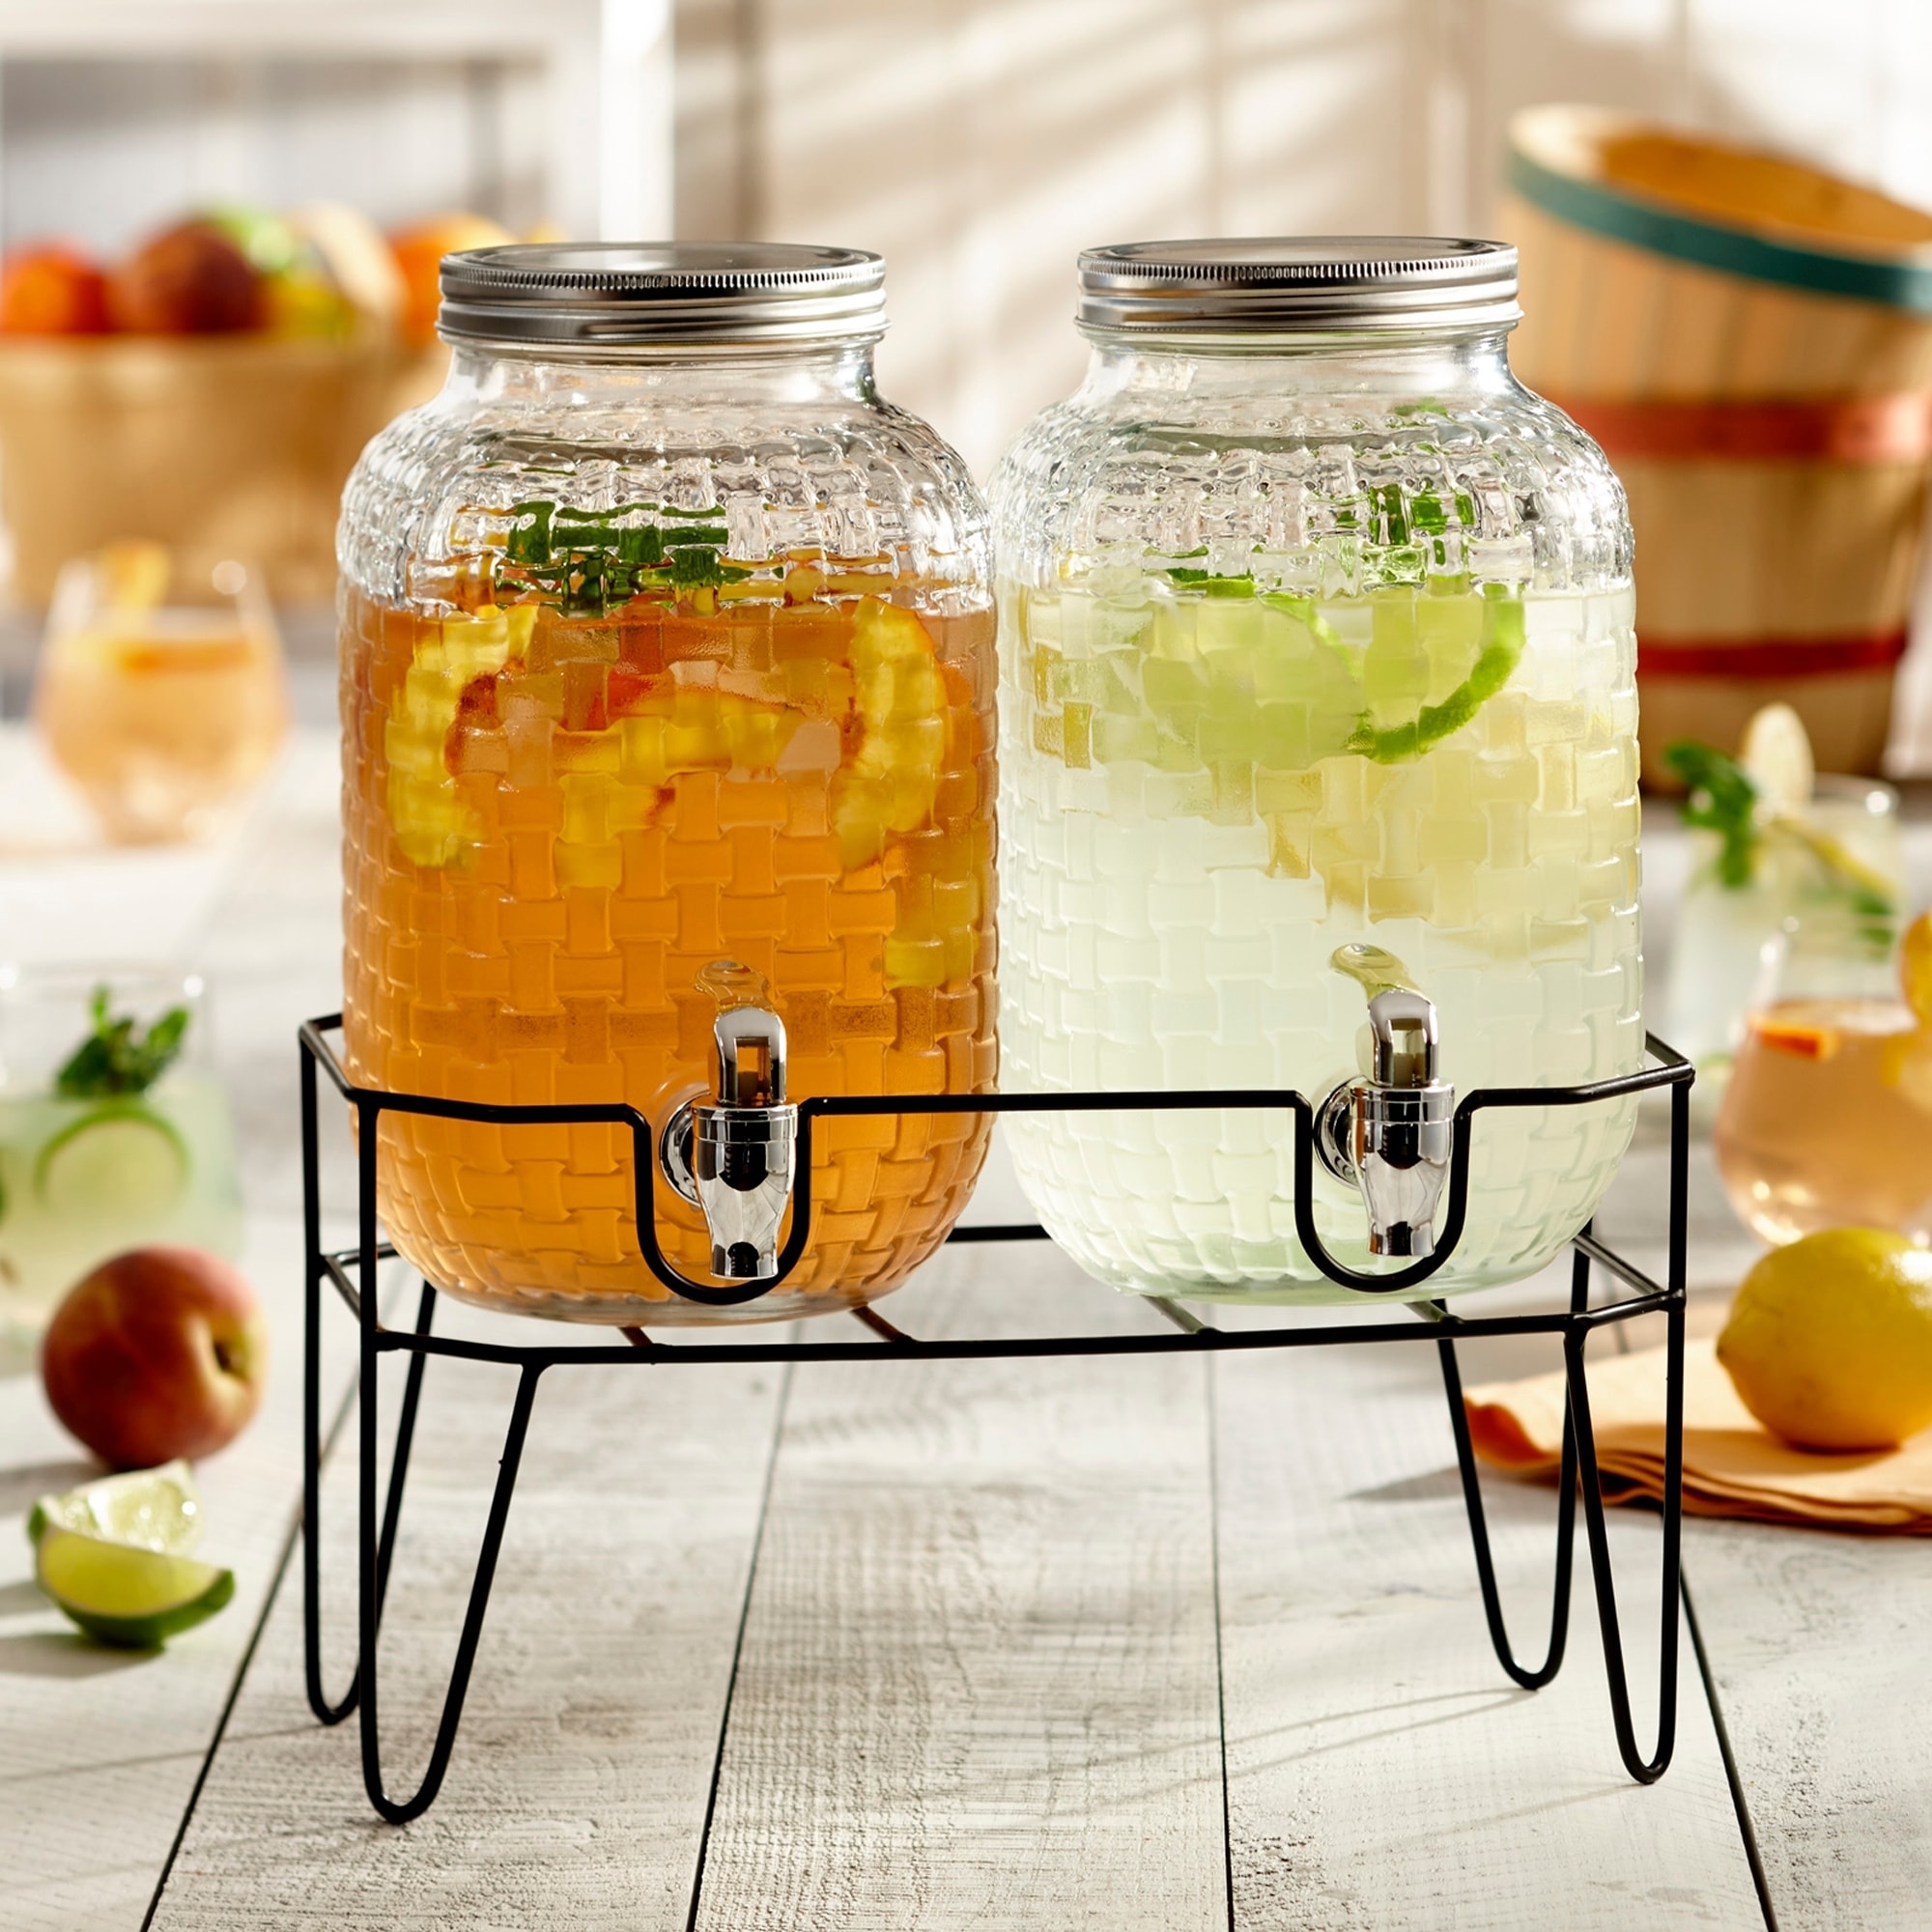 Tall Square Glass Mason Jar Drink Dispenser with Stainless Steel Spigot, 80 oz (2.36 Liters)